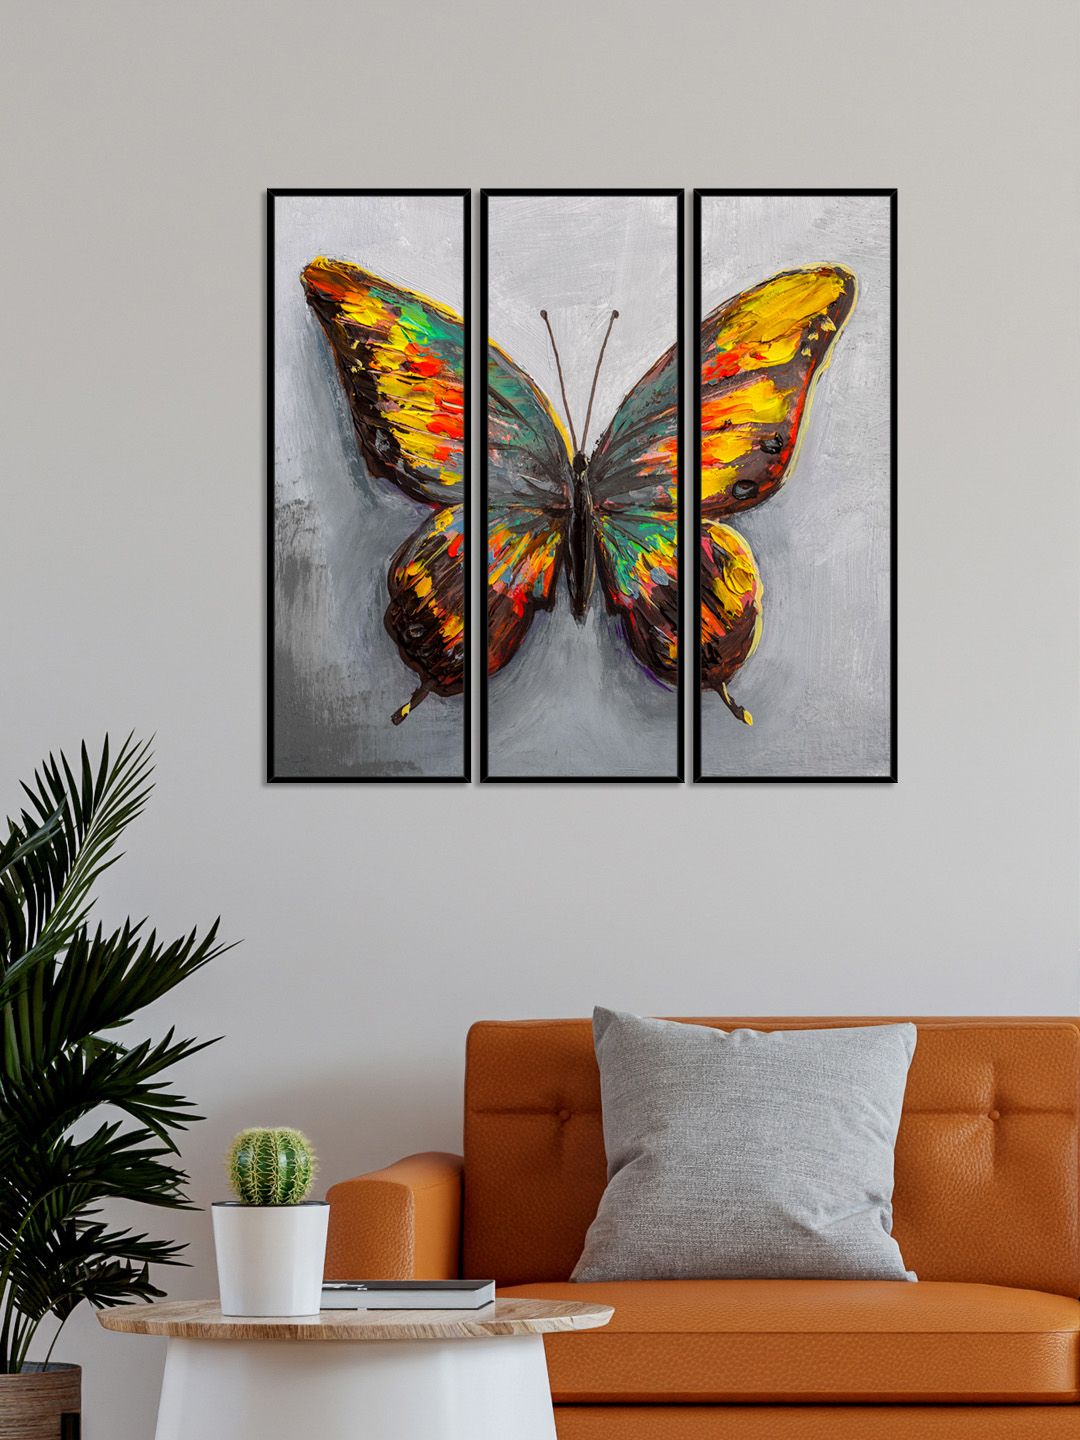 999Store Set of 3 Butterfly Canvas Wall Painting Price in India